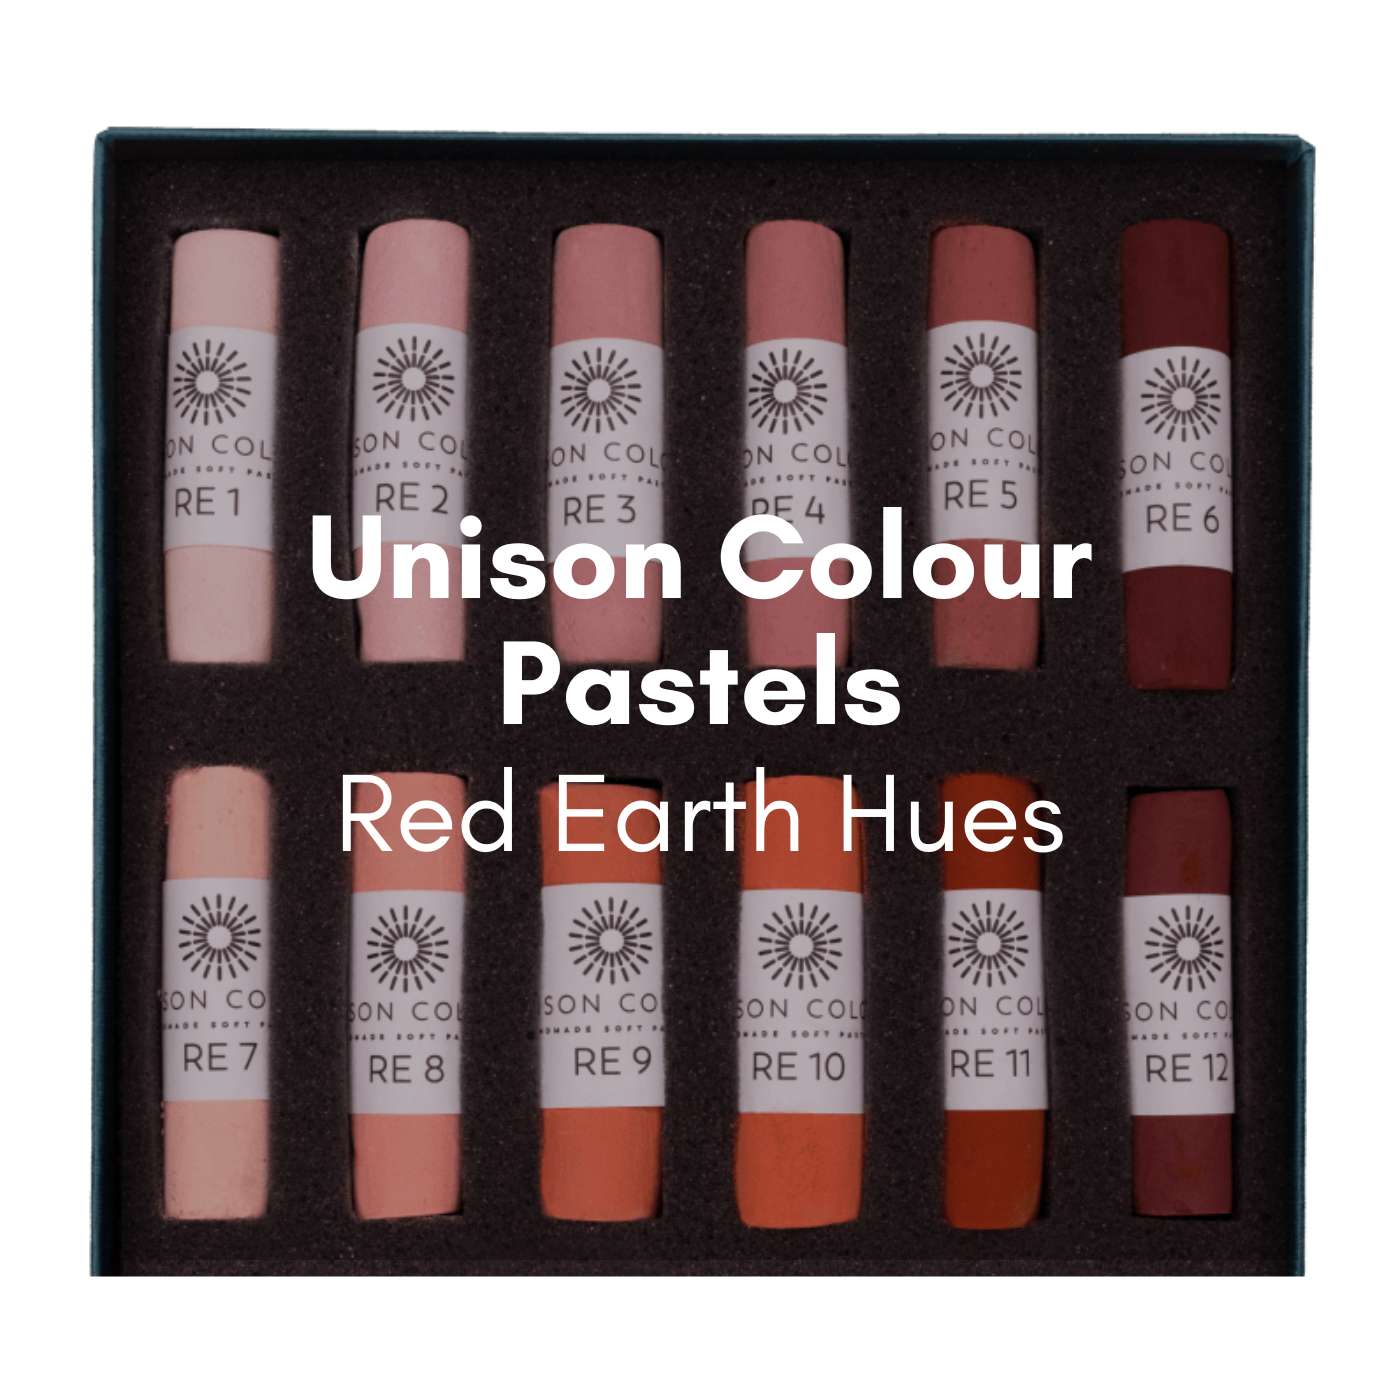 https://cdn.shopify.com/s/files/1/1238/4940/products/unison-colour-soft-pastel-unison-colour-individual-handmade-soft-pastels-red-earth-hues-38704293740797_1445x.jpg?v=1674840522